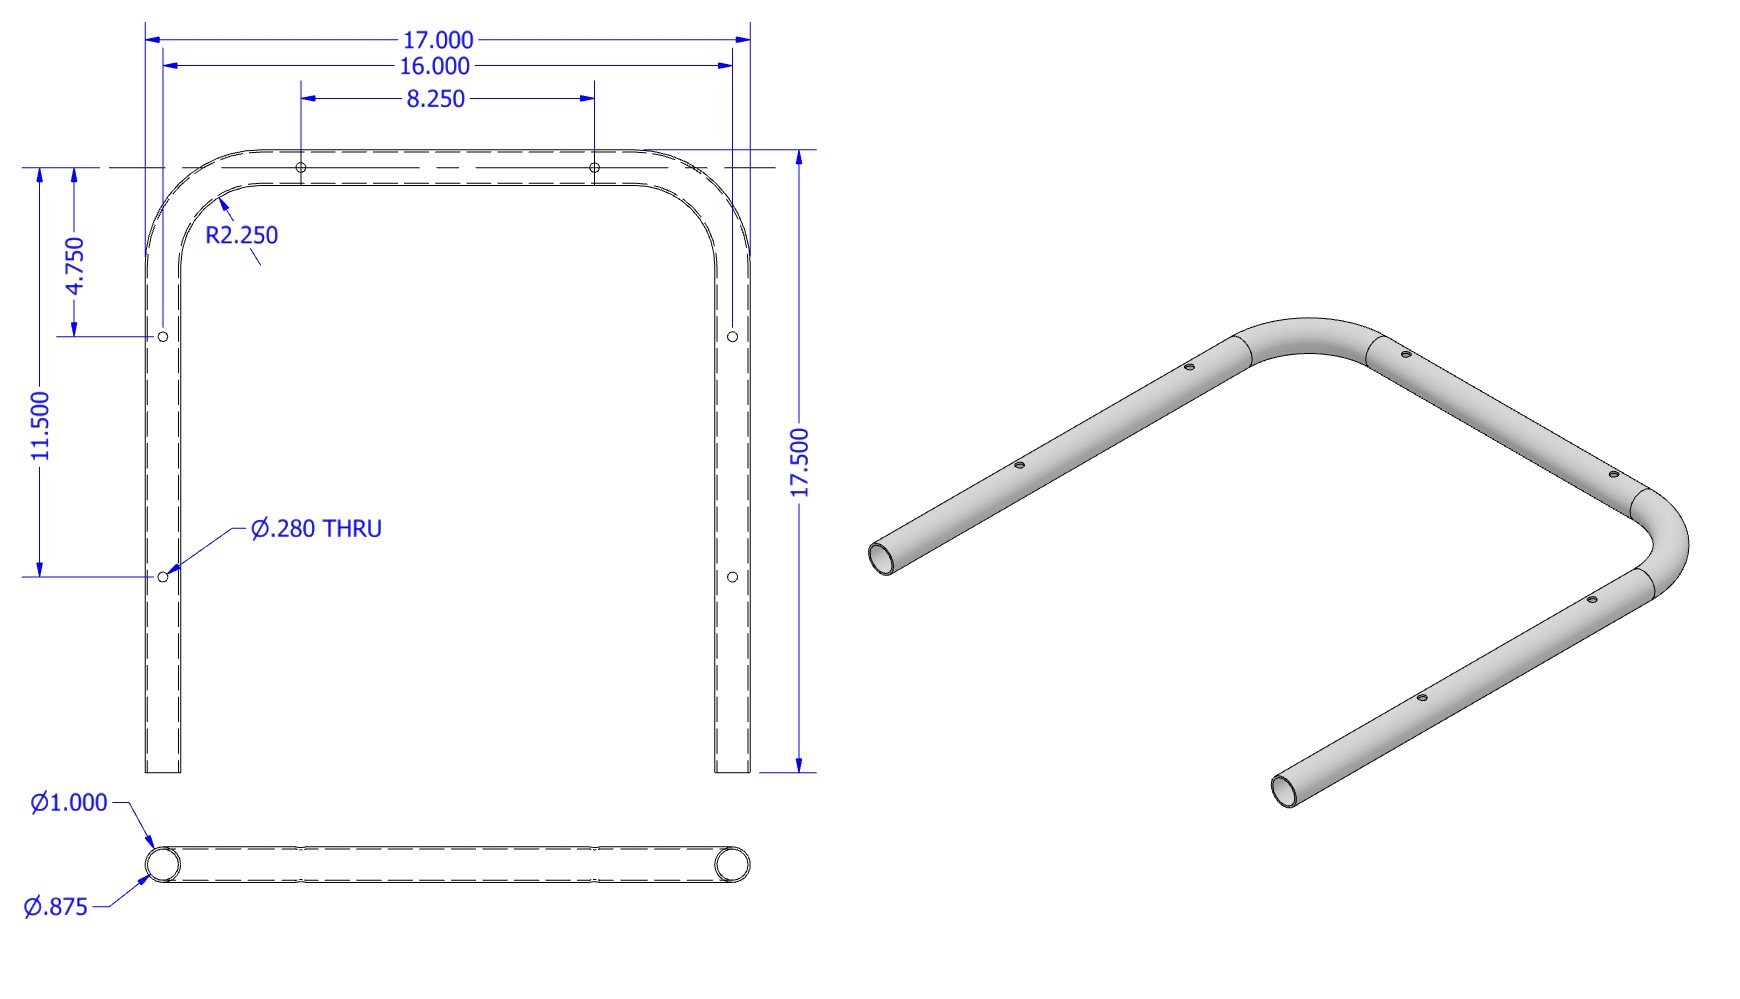 Mounting Tube Dimensions